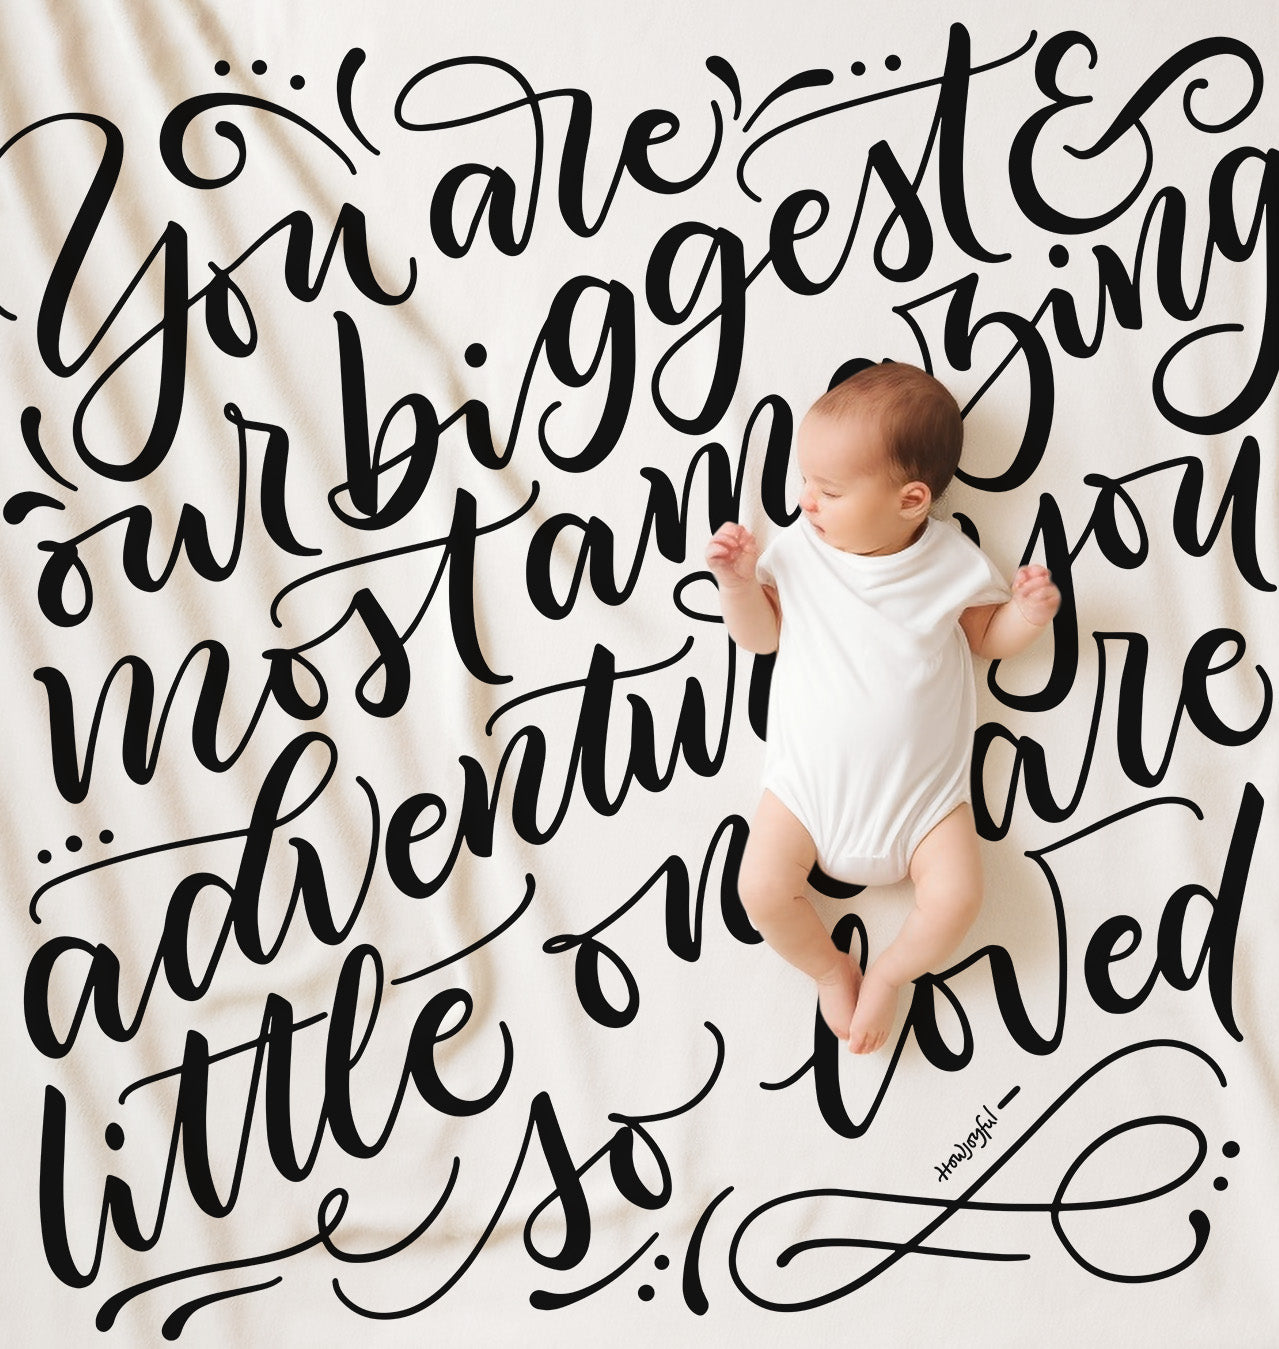 You are our biggest and most amazing adventure - Lightweight Swaddle - howjoyfulshop